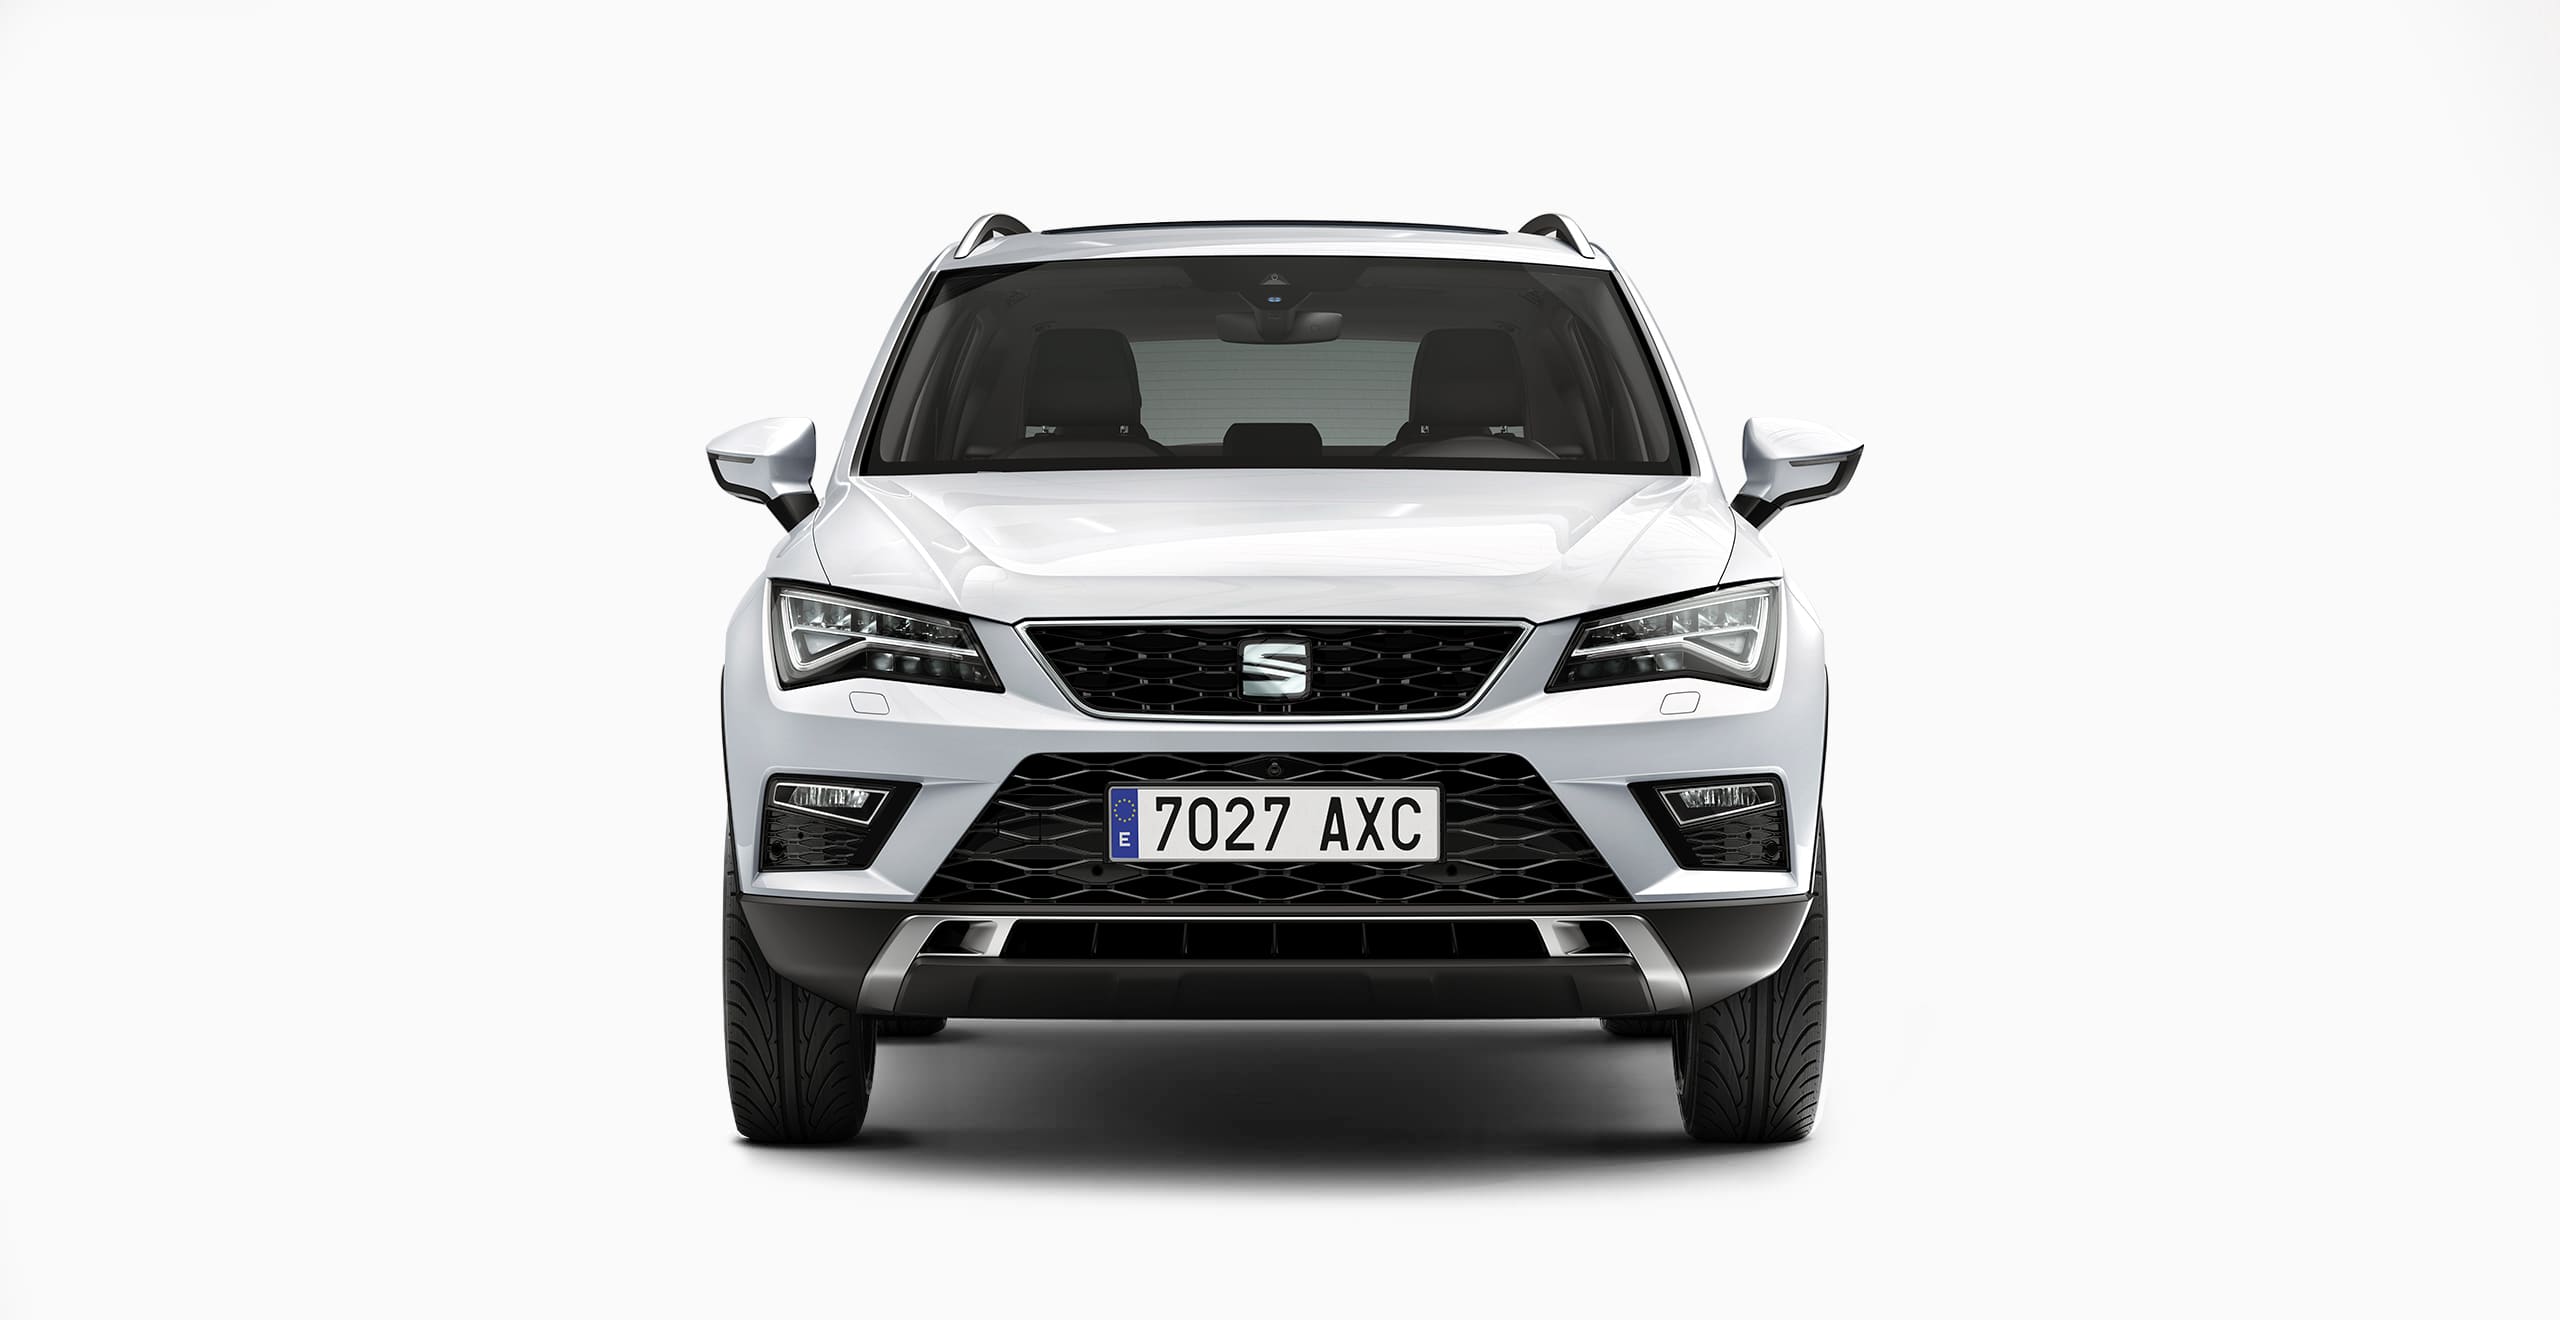 SEAT Ateca car foto. Showing safety and protection